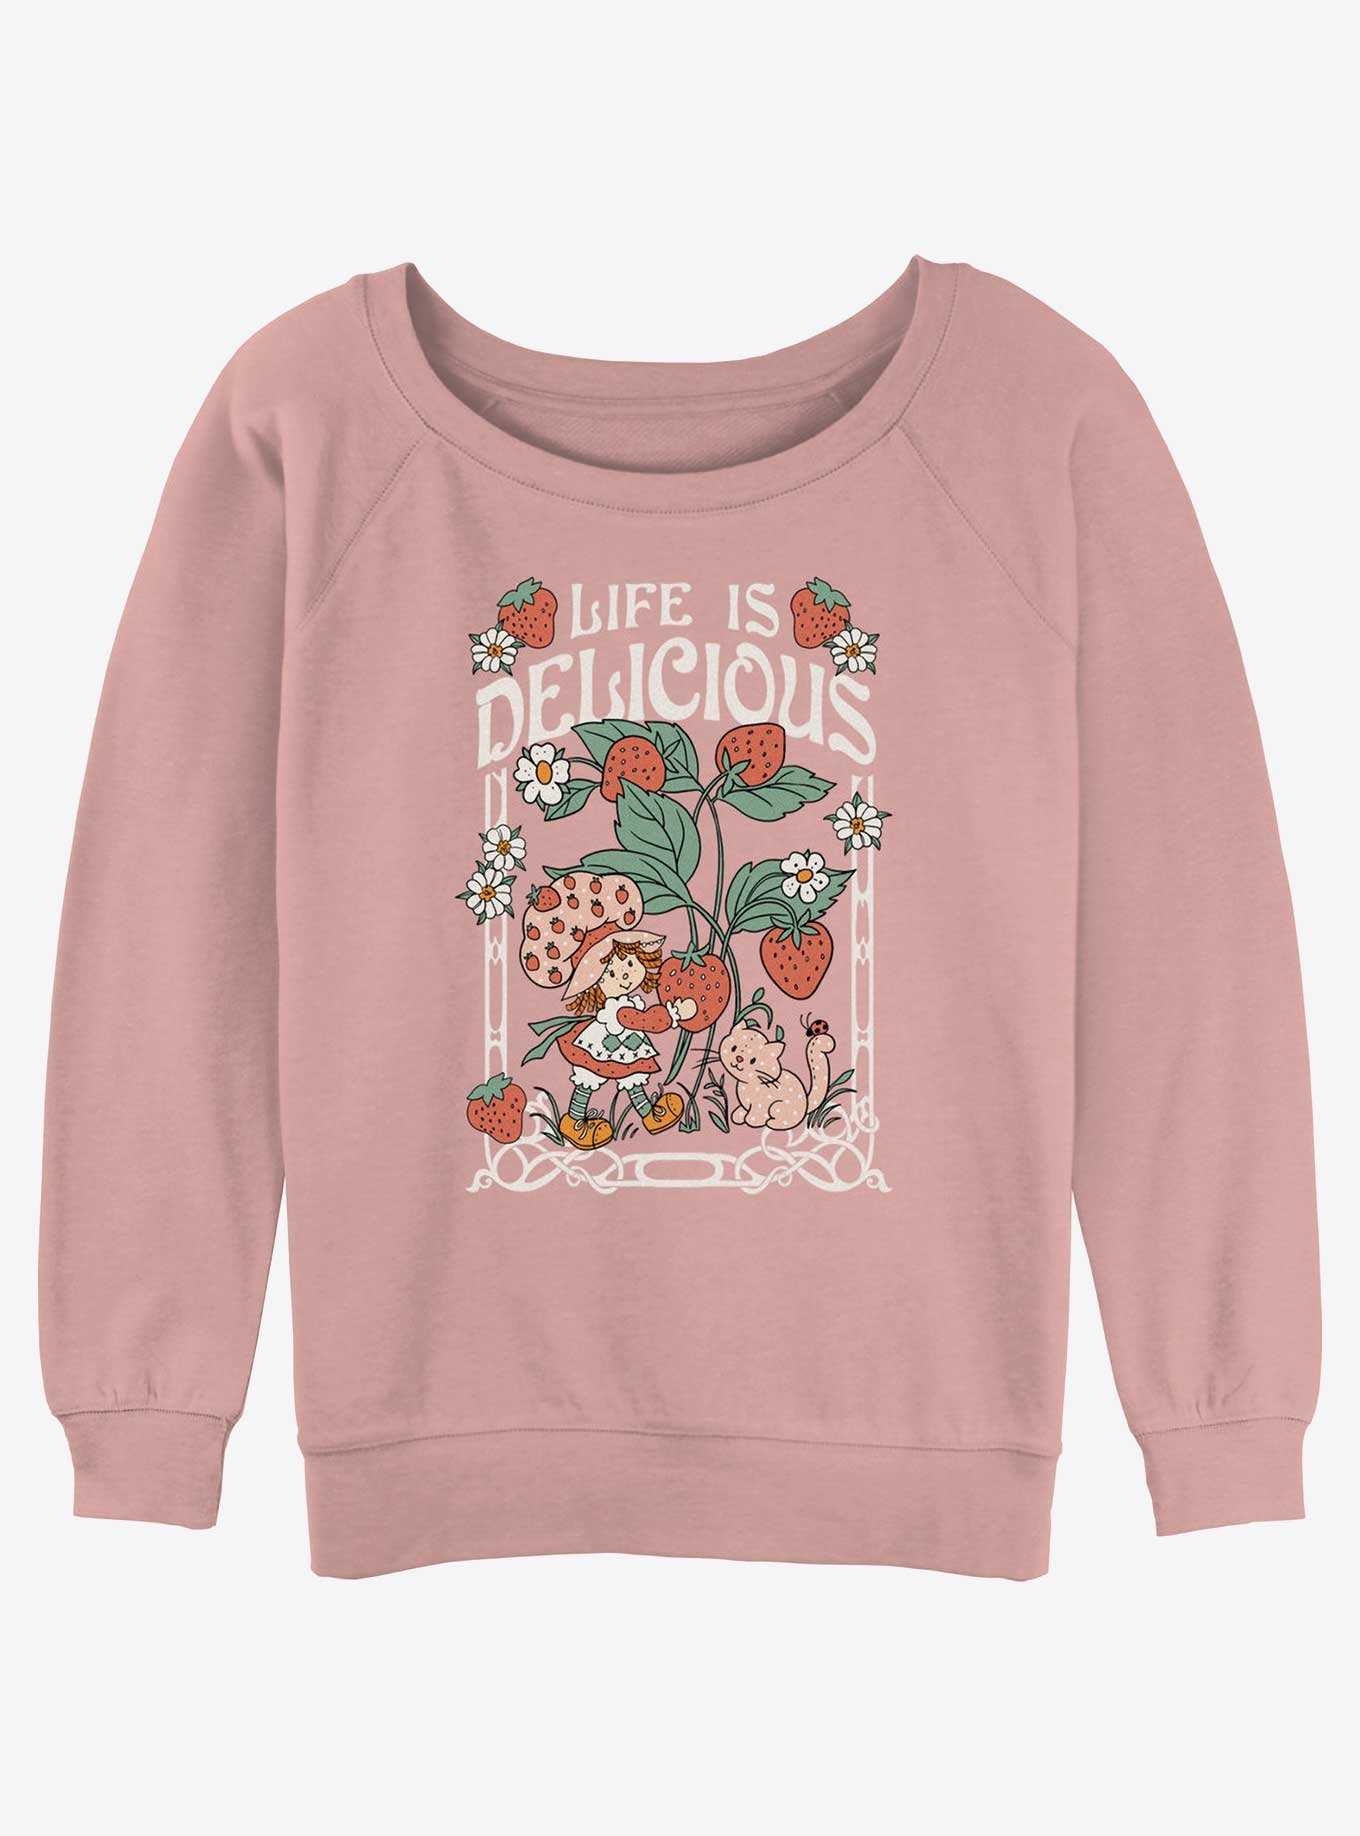 Strawberry Shortcake Life Is Delicious Poster Girls Slouchy Sweatshirt, , hi-res